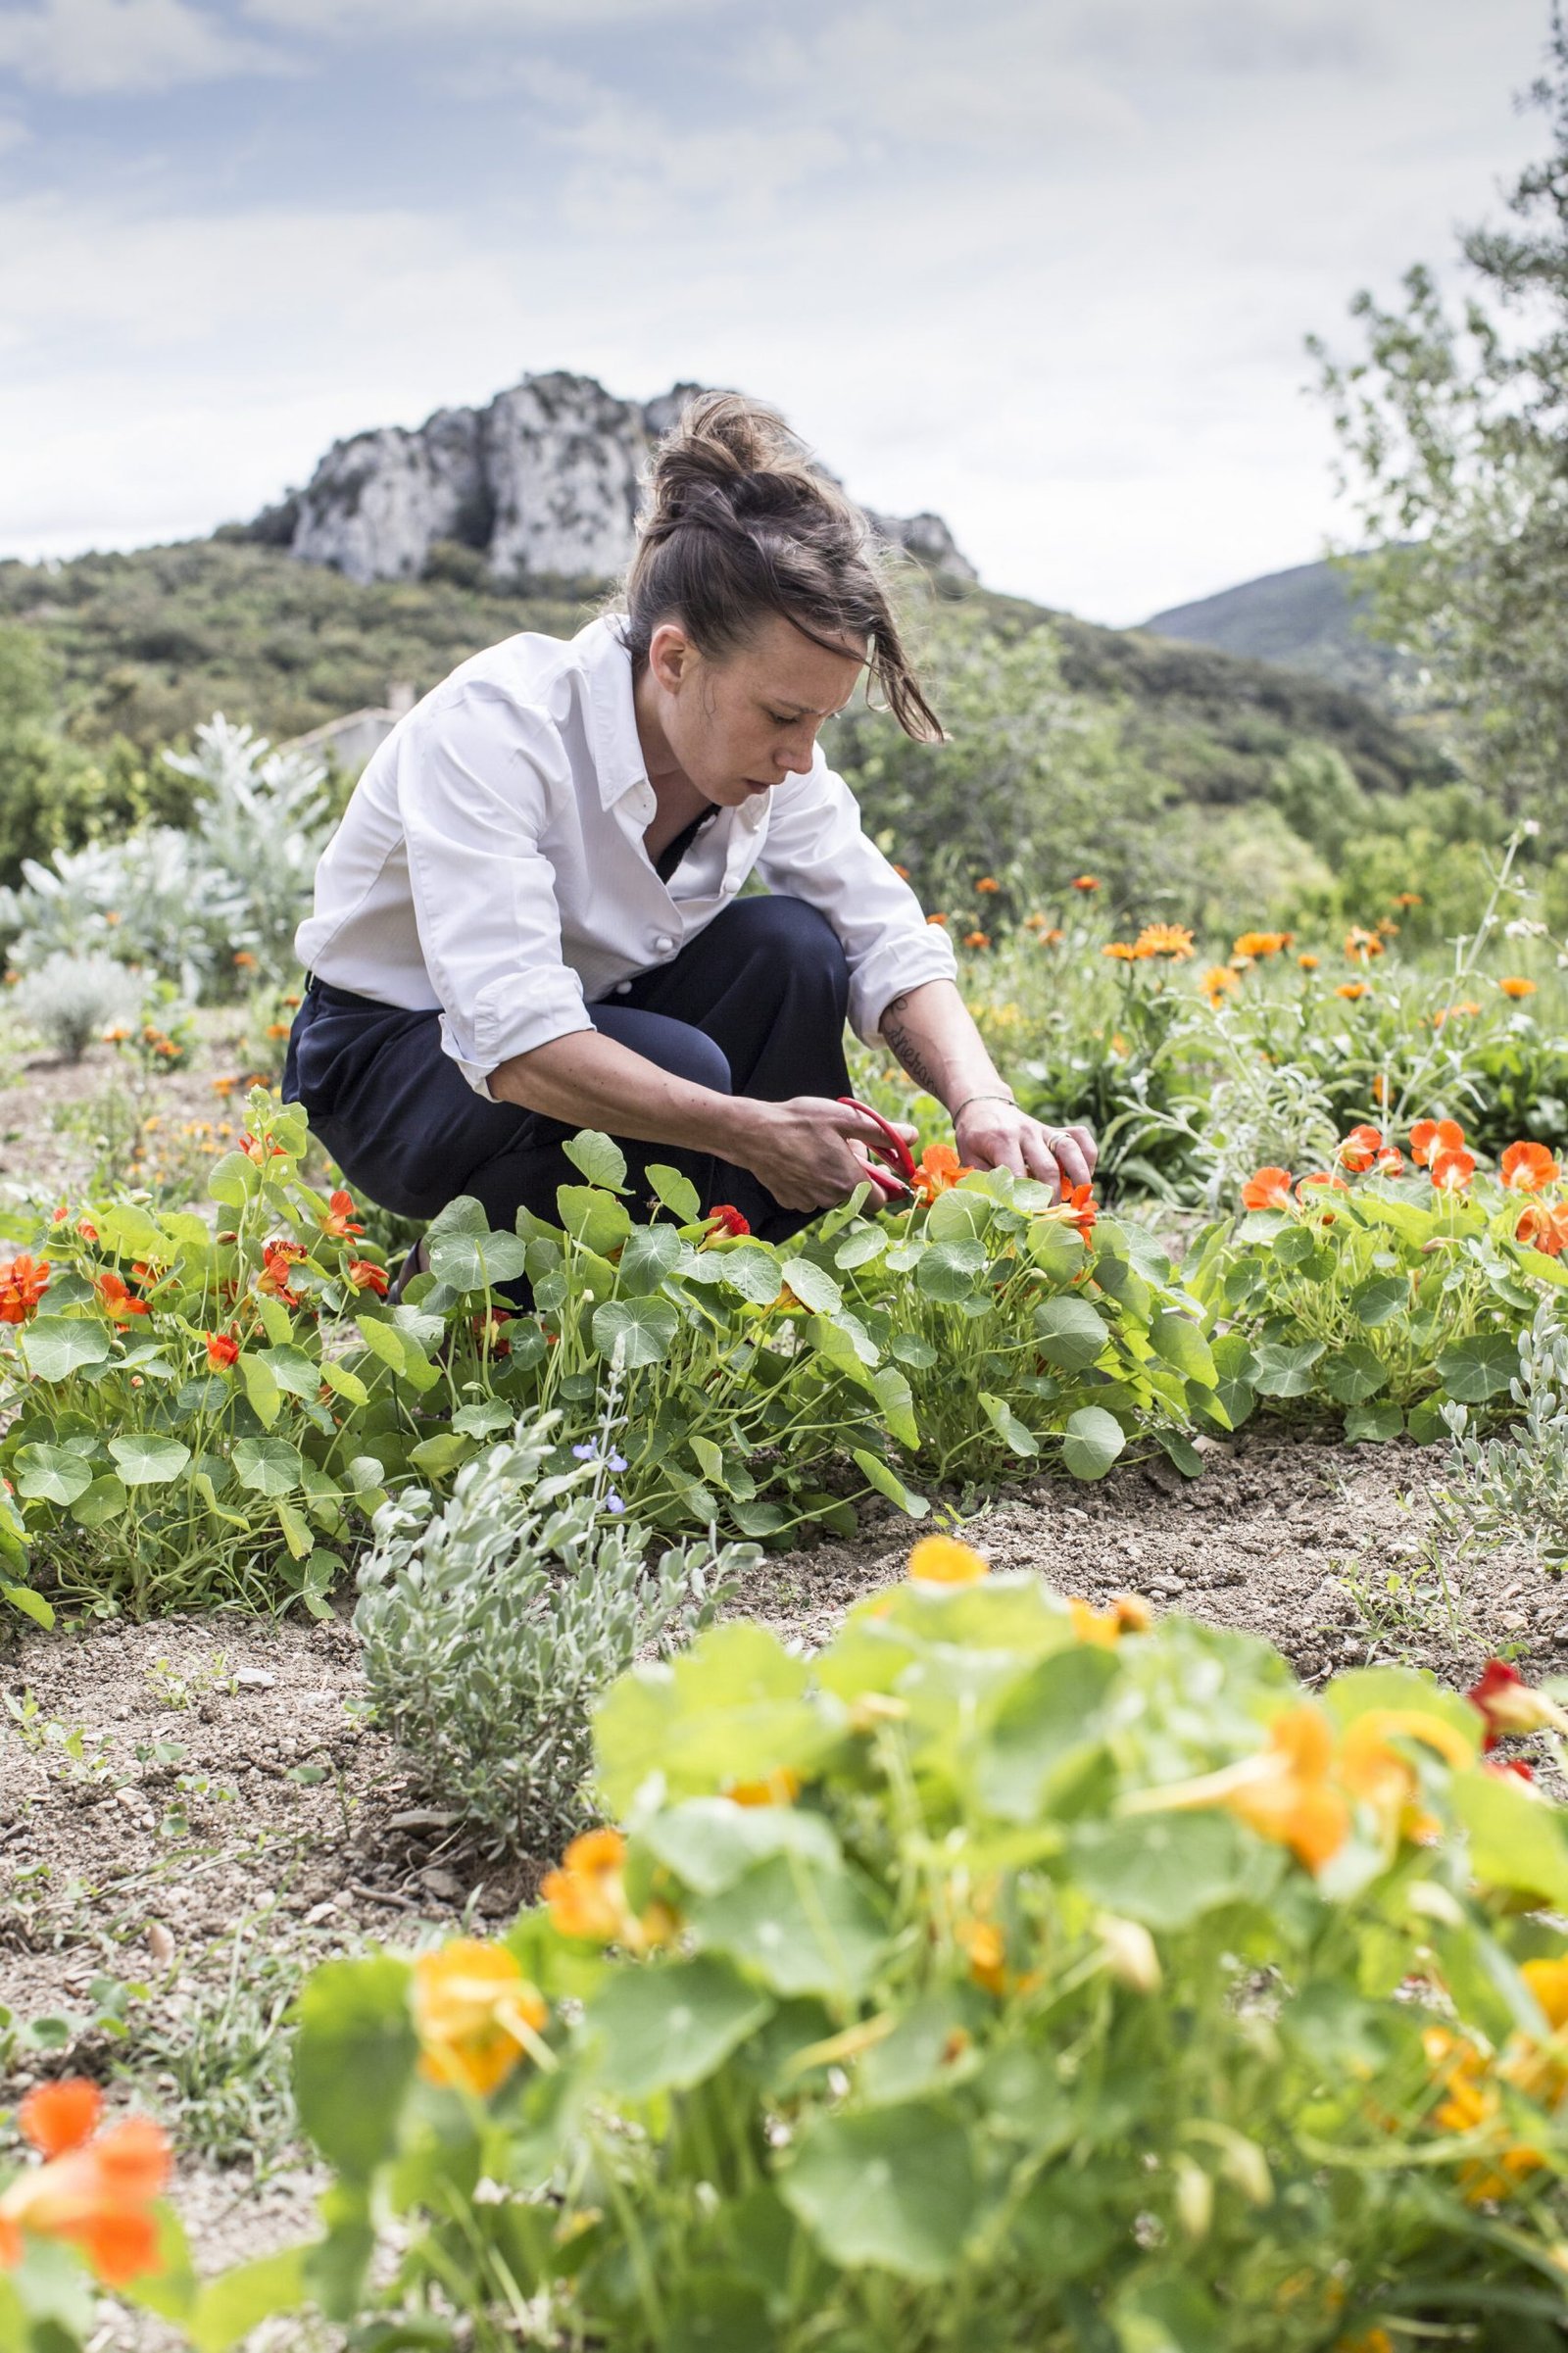 The chief Amélie Darvas opened the Aponem restaurant dedicated to cooking food from their vegetable garden.